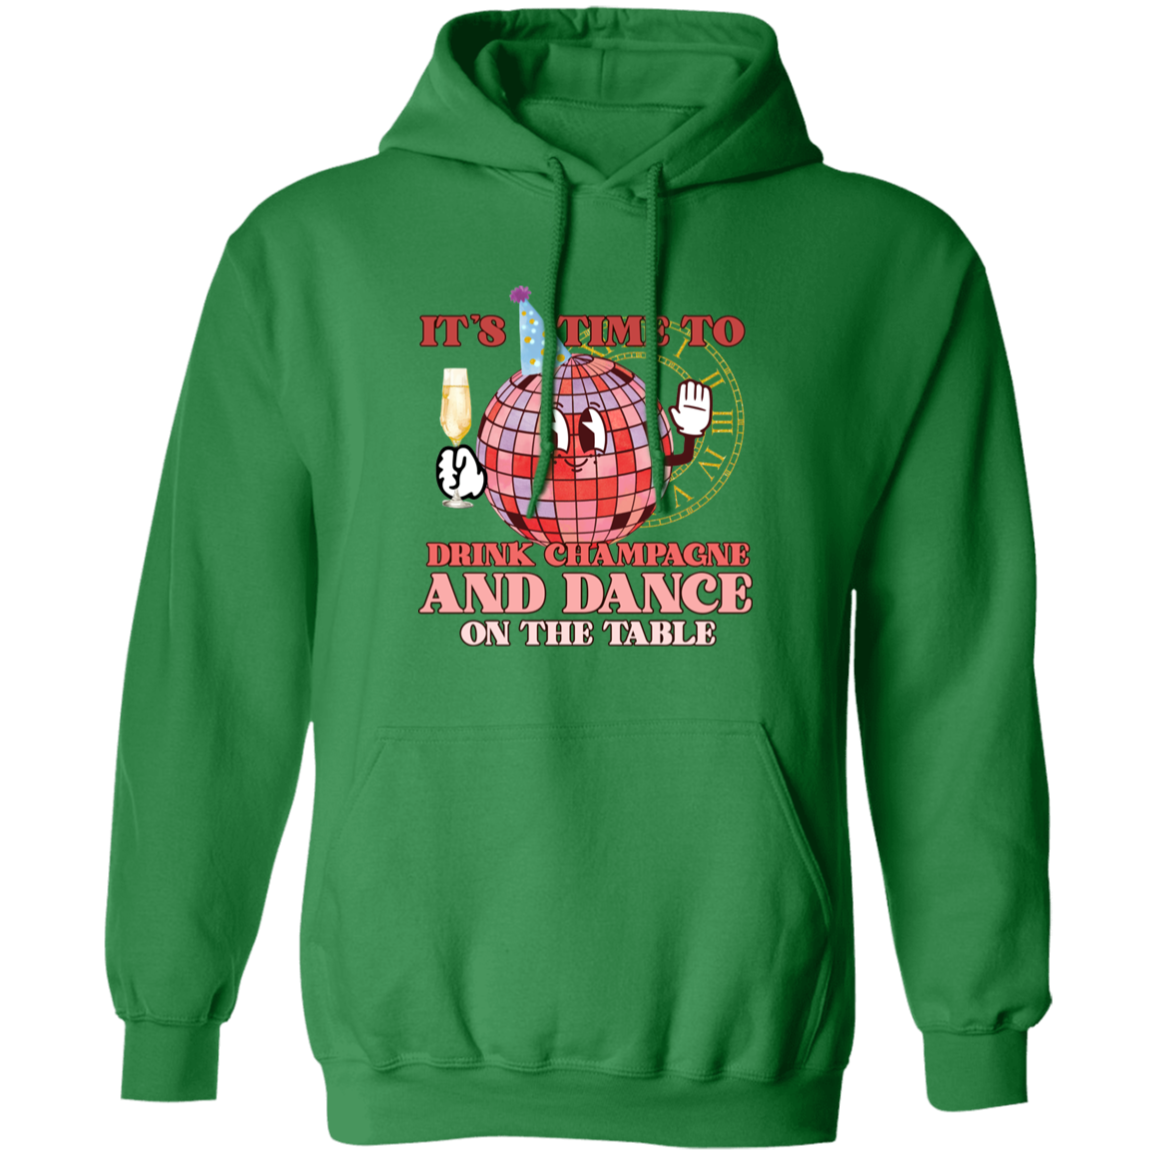 It's Time To Drink Champagne & Dance on the Table Hoodie